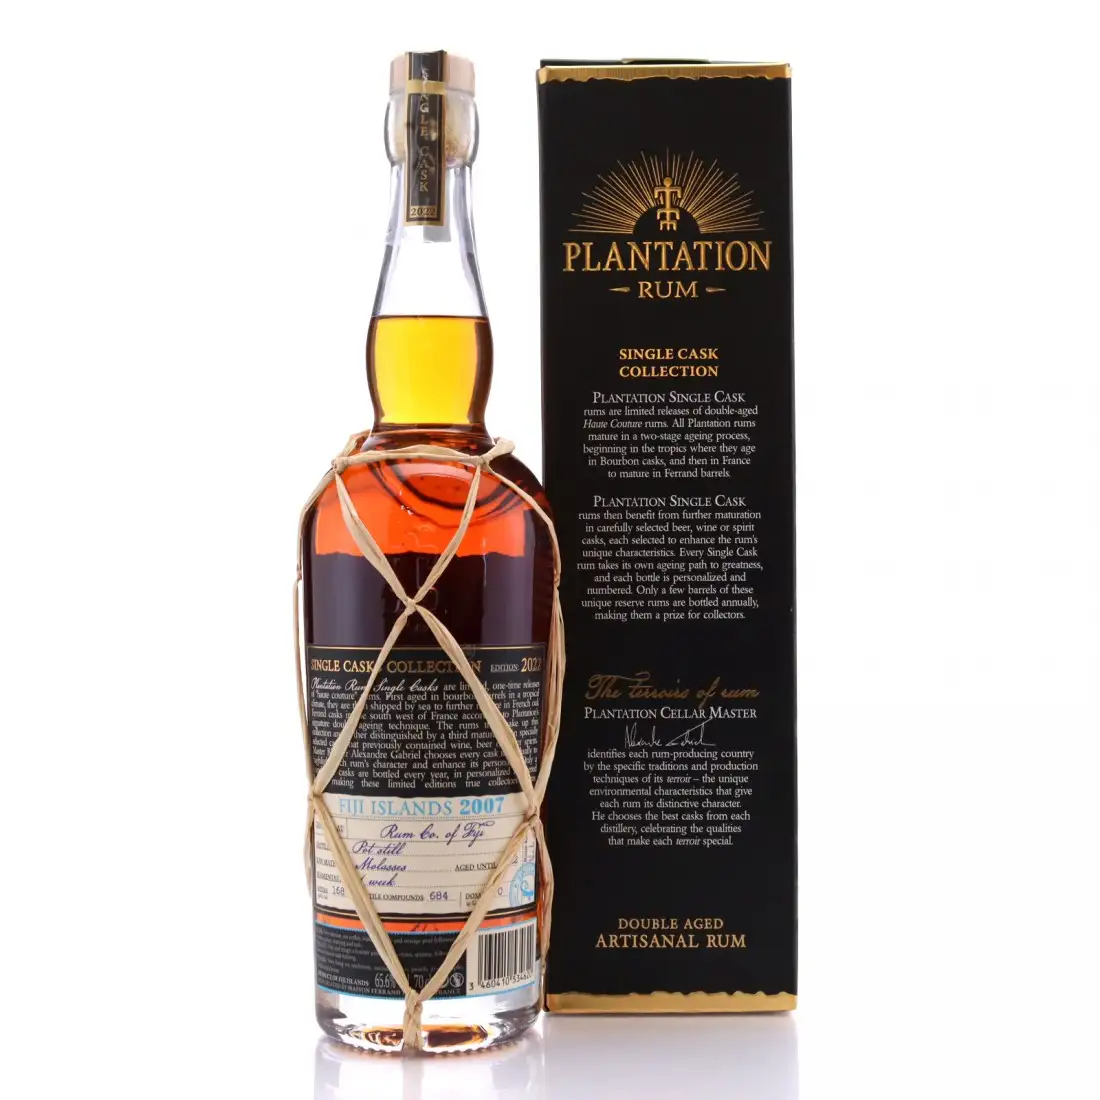 Image of the front of the bottle of the rum Plantation Fiji Islands 2007 (Finished in Ferrand 10 Générations cask)